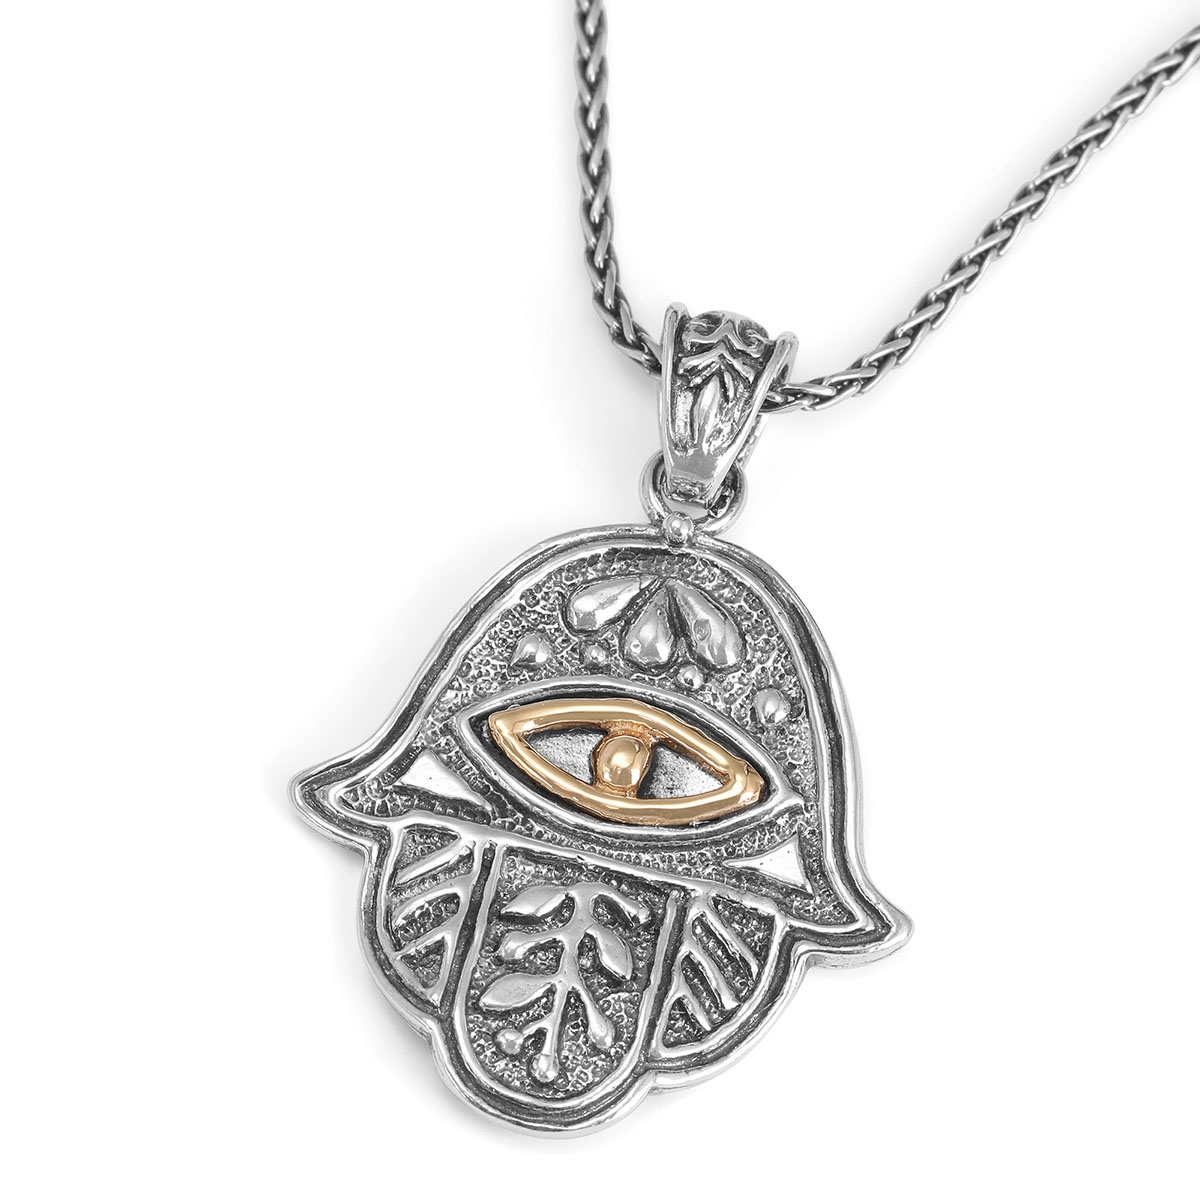 925 Sterling Silver Hamsa Necklace With Gold-Plated Evil Eye Design - 1